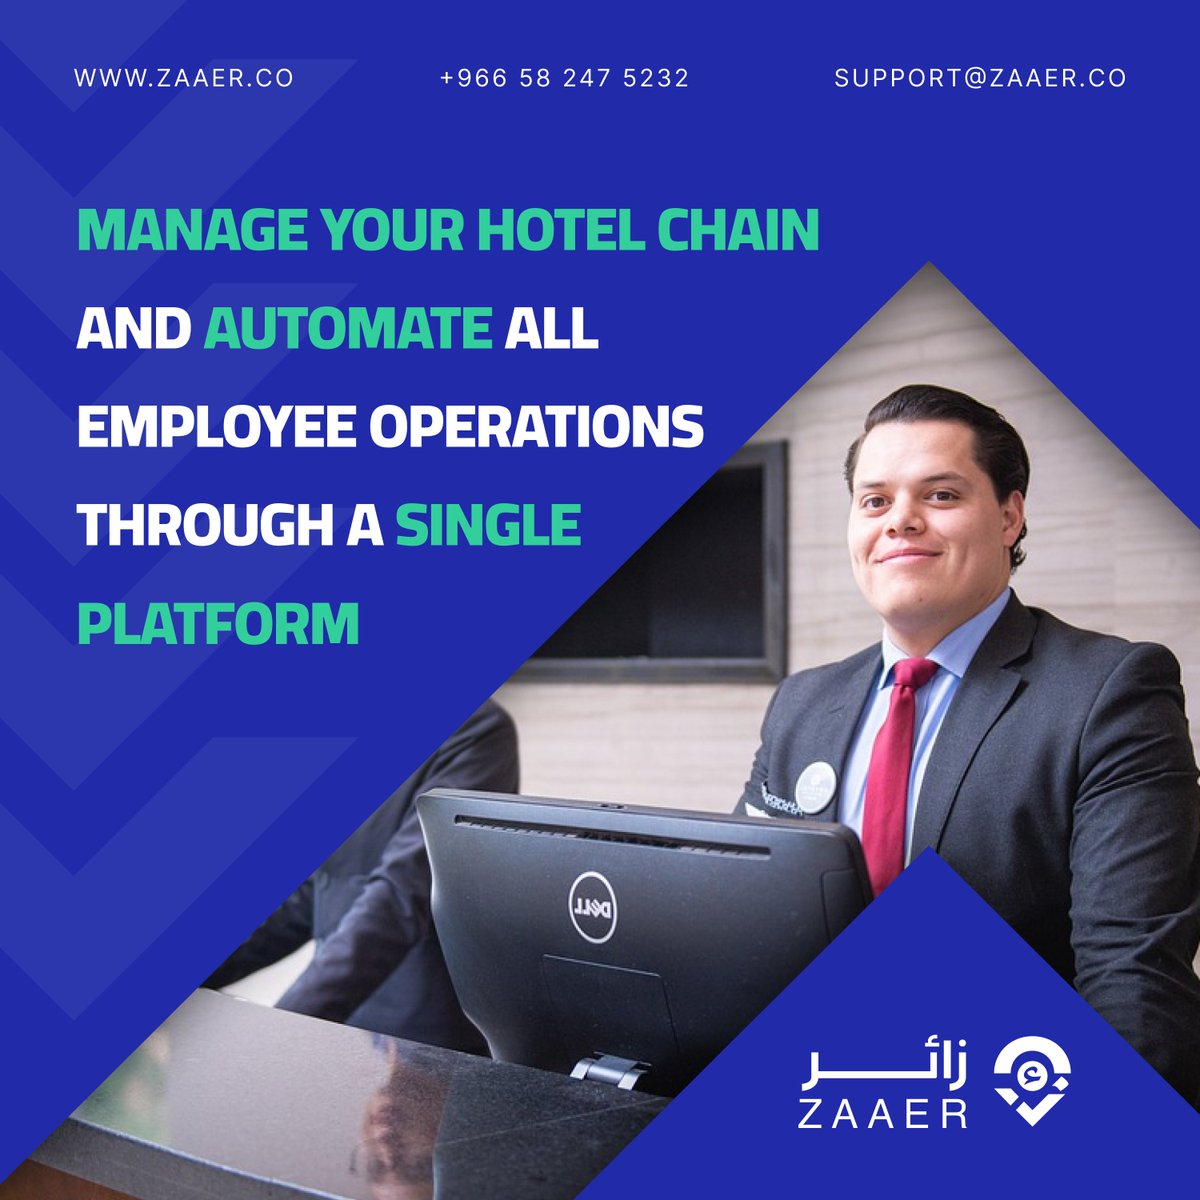 Manage your hotel chain and automate all employee operations through a single platform. #HotelManagement #EmployeeAutomation #Efficiency #ZAAERPMS #SaudiArabia #Vision2030.